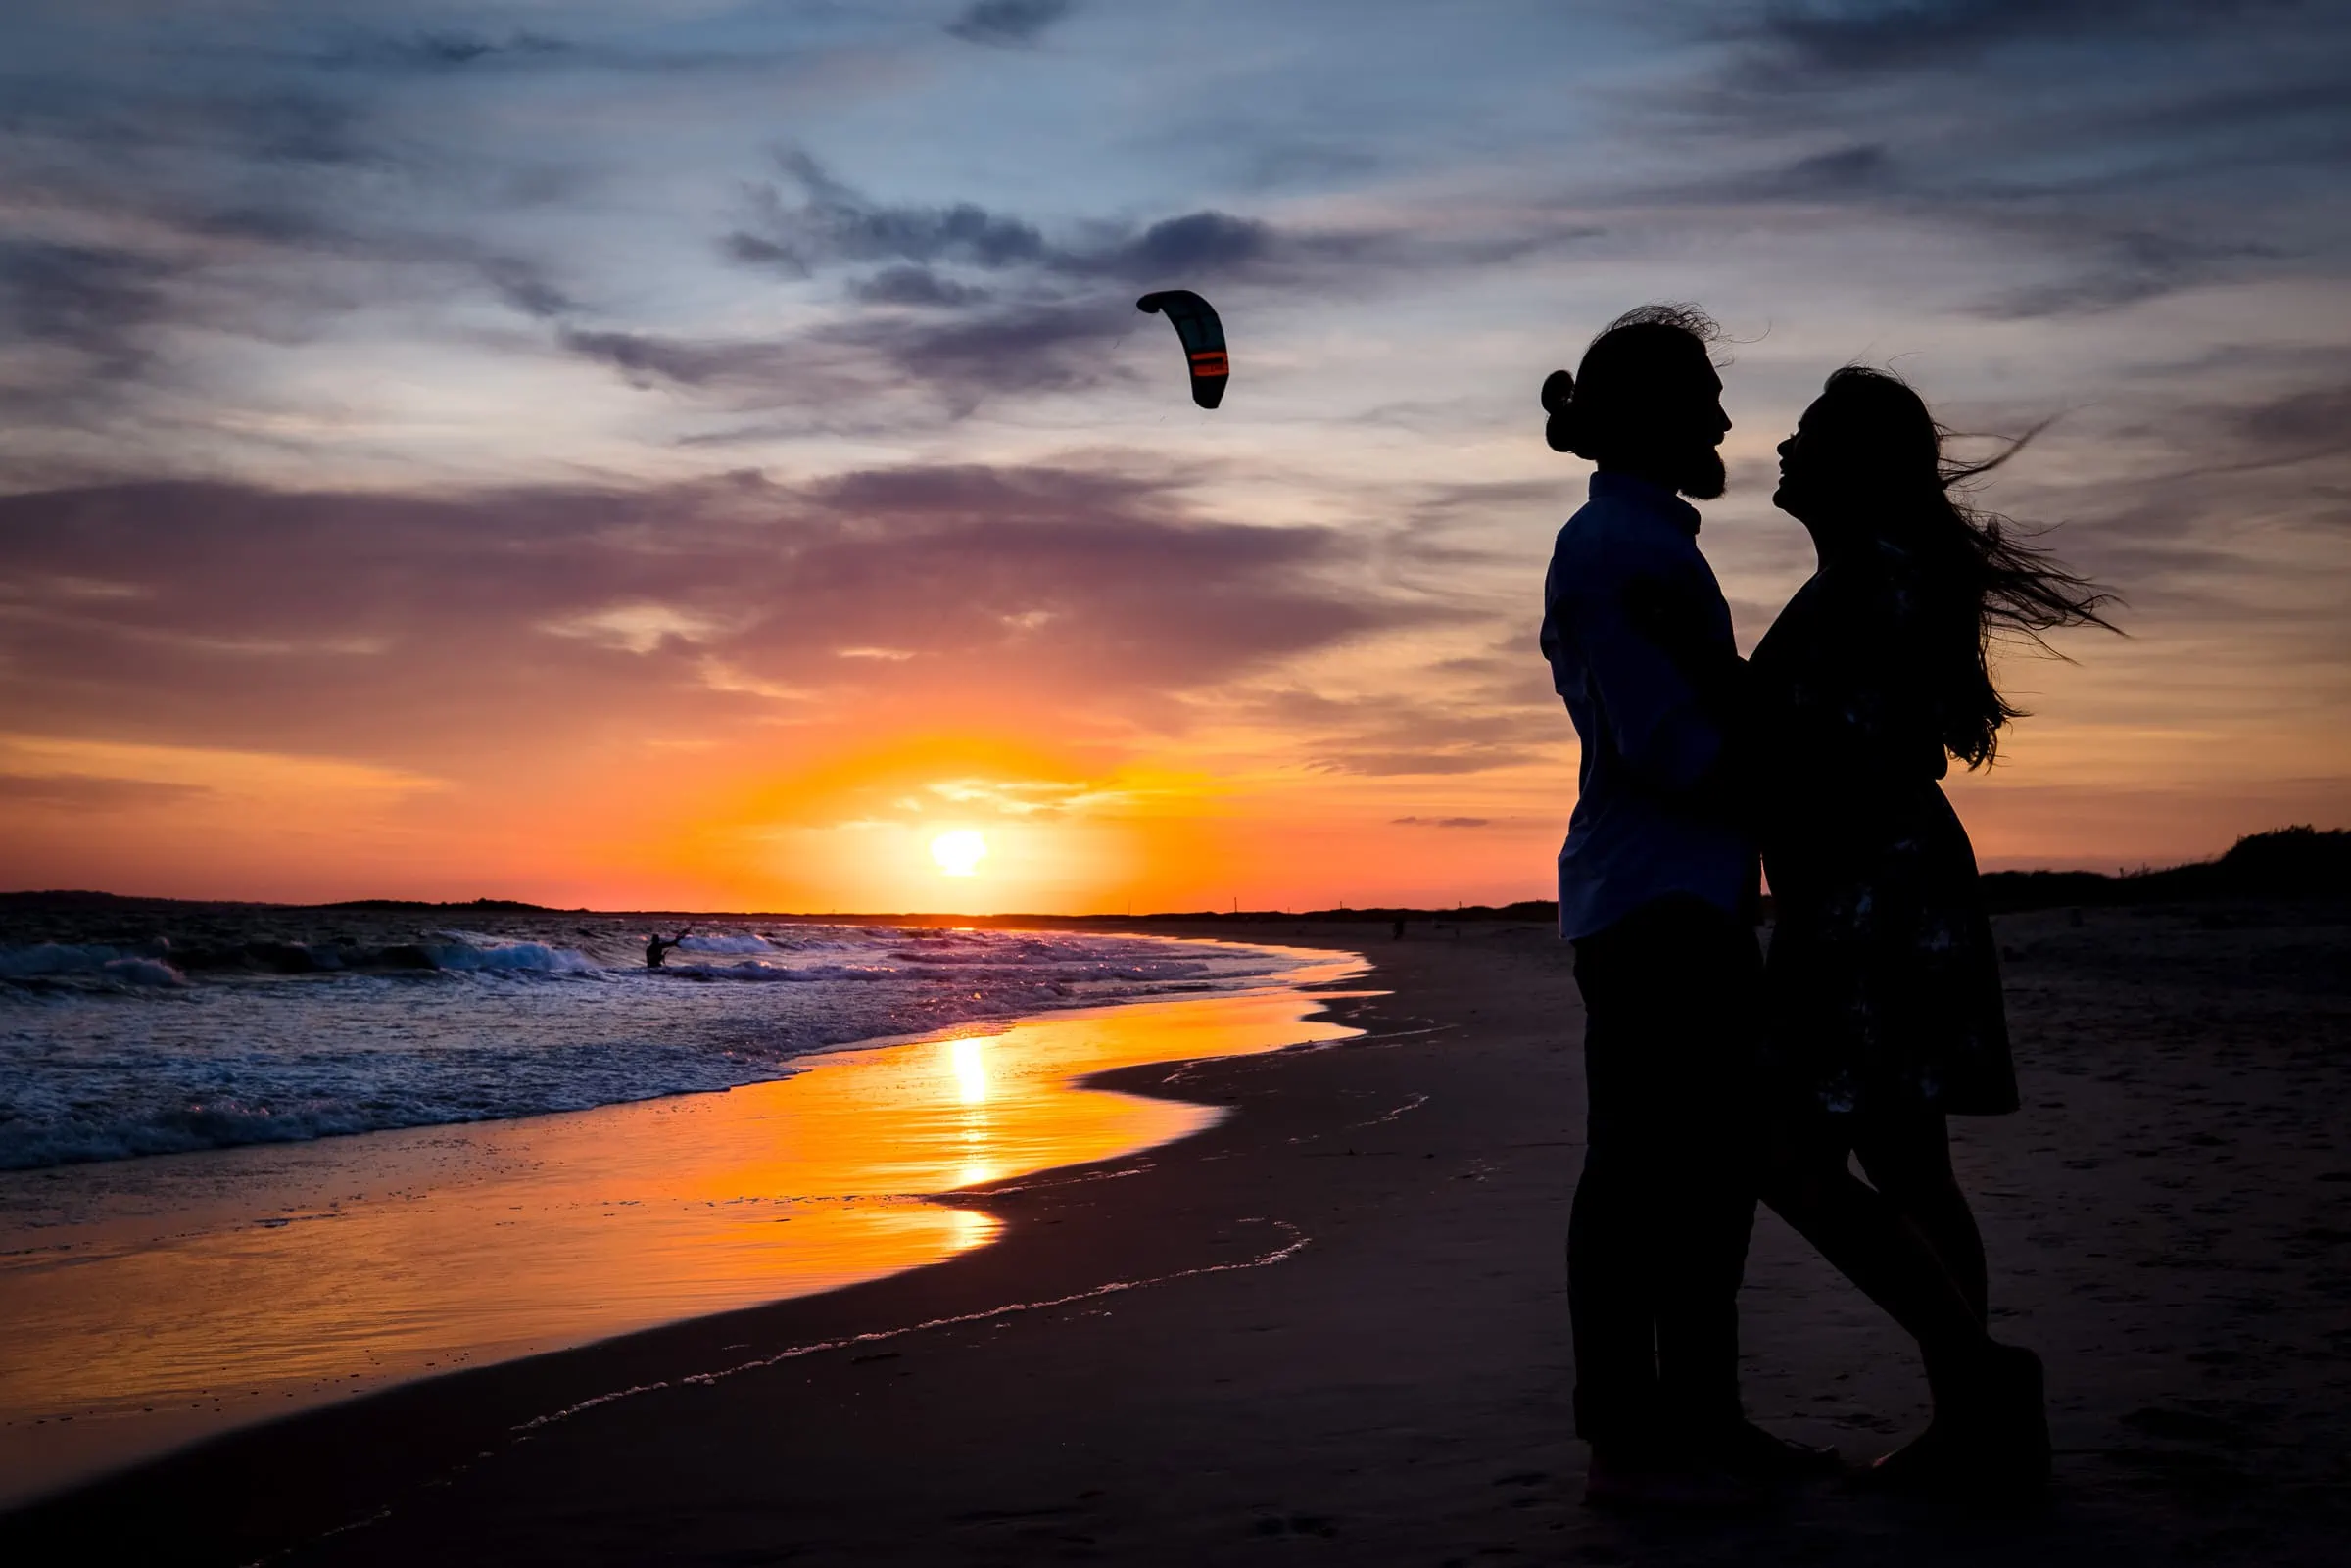 A man with a bun, and woman with flowing hair look at each other in silhouette with a gorgeous sunset, the ocean and a kite surfer behind them